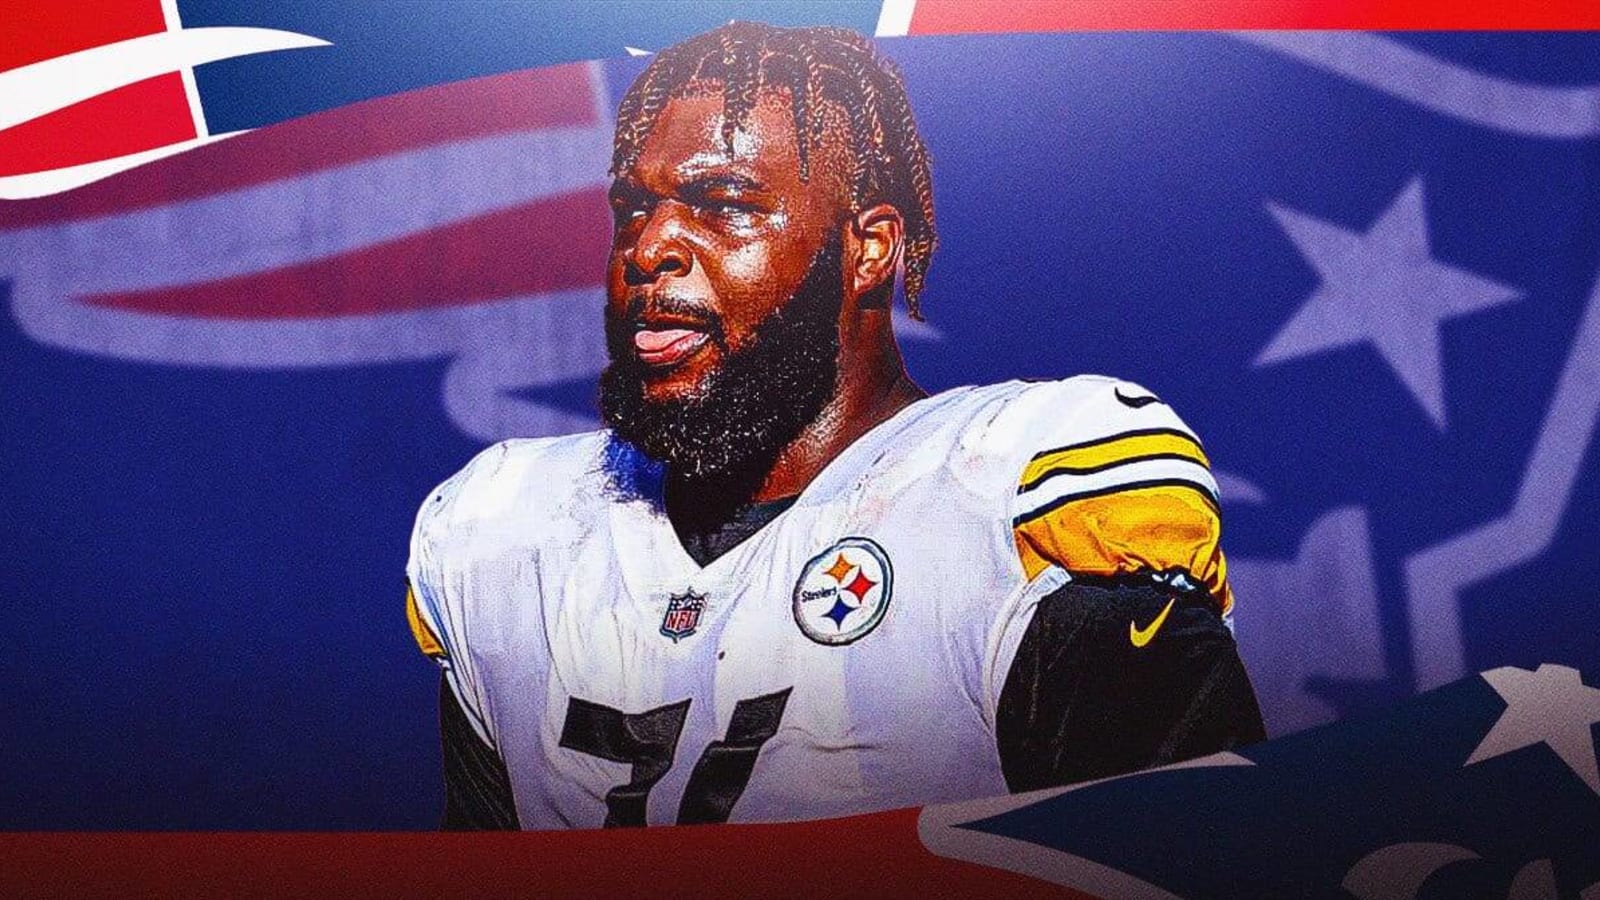 Patriots sign former Steelers tackle to deal